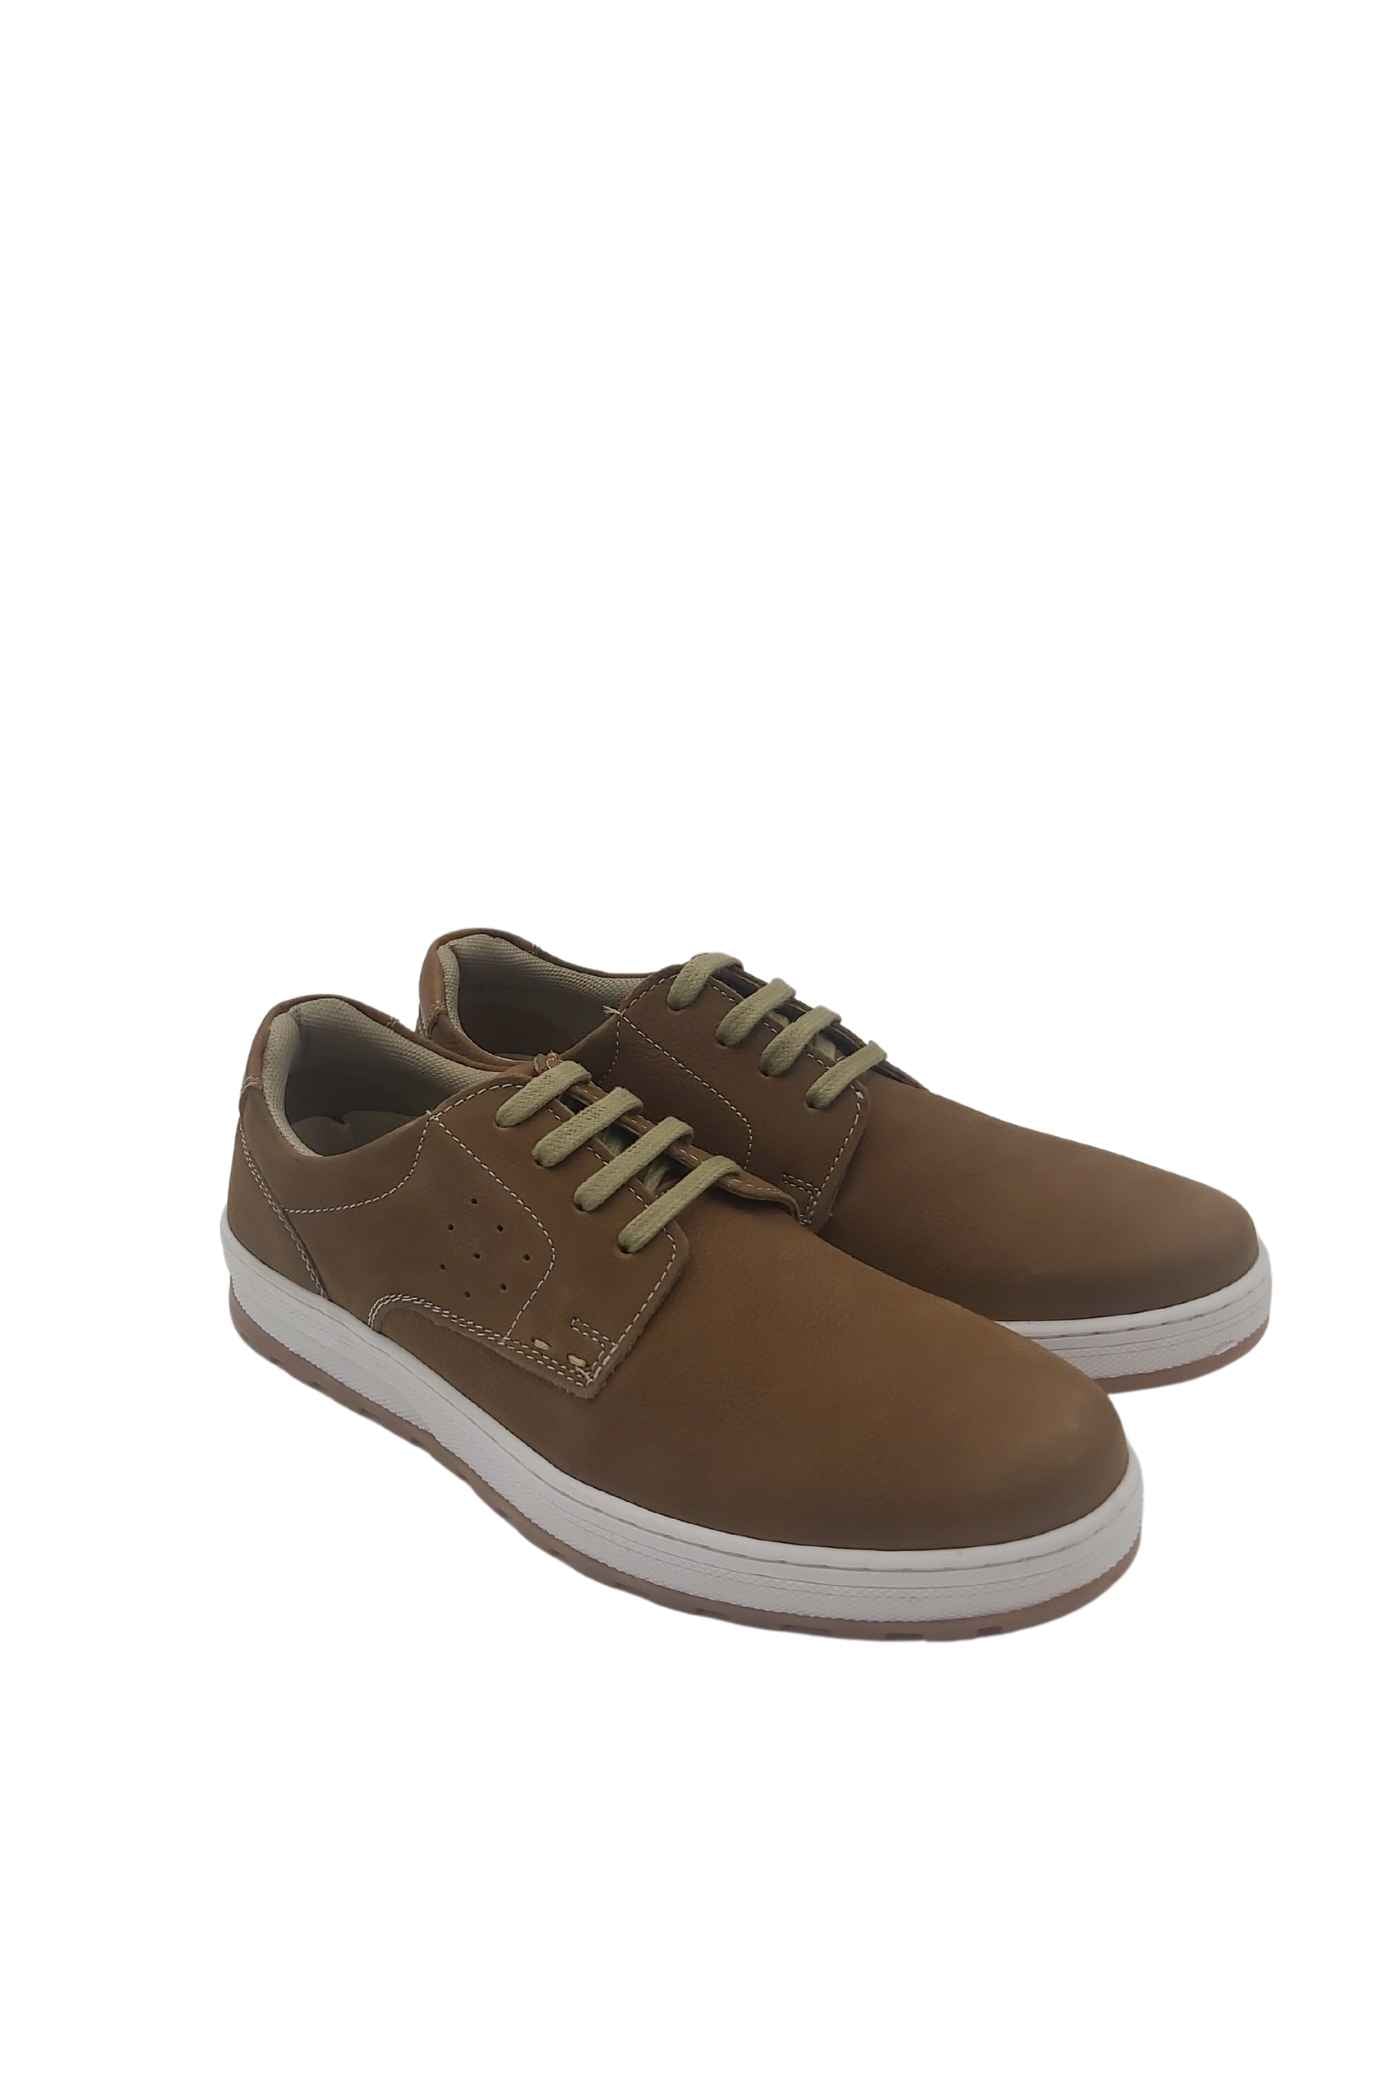 Men's Daly Tan Smart Casual Shoe-Side/Front View